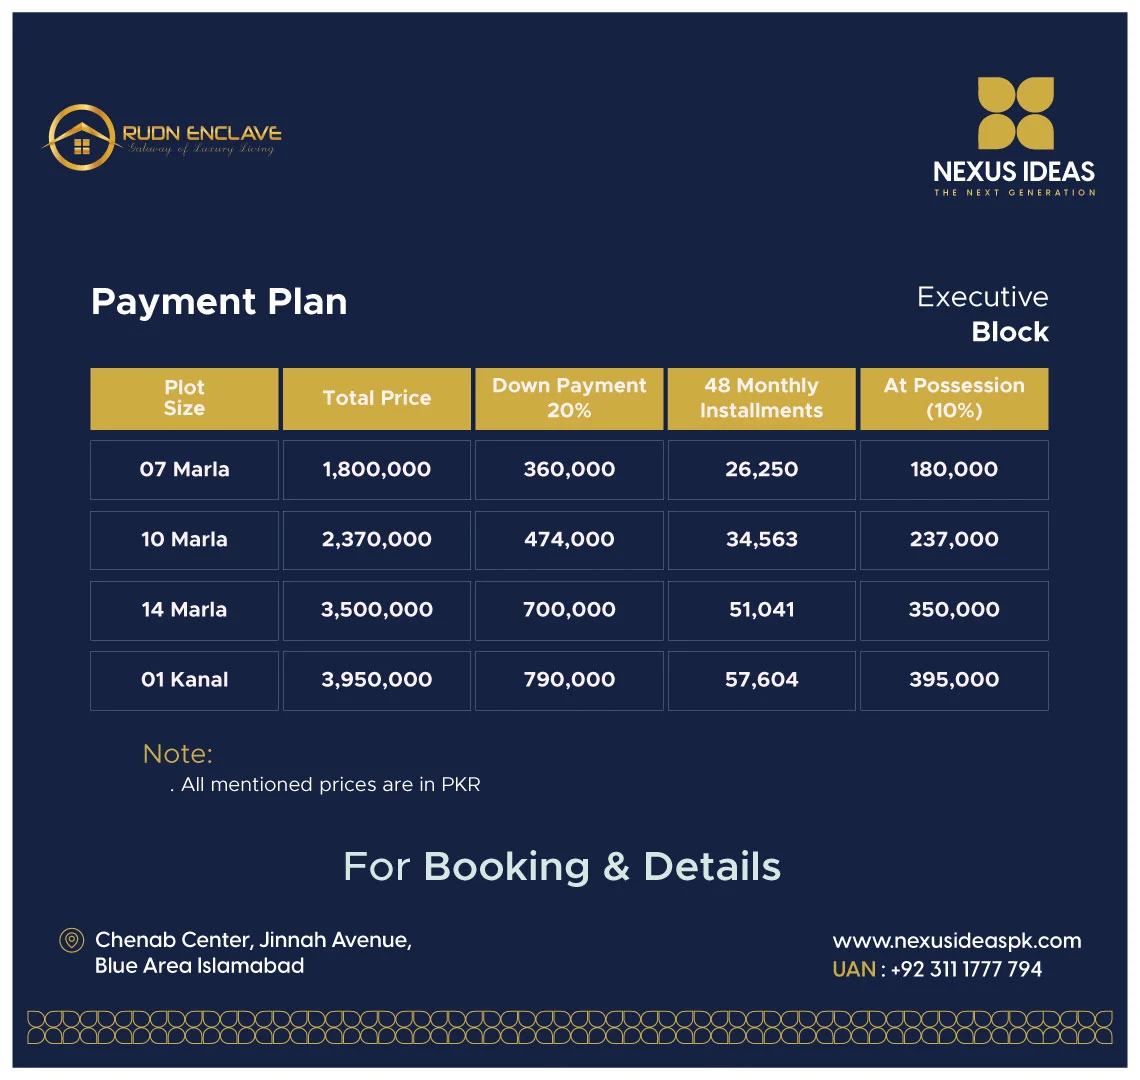 Rudn Enclave islamabad executive block payment plan